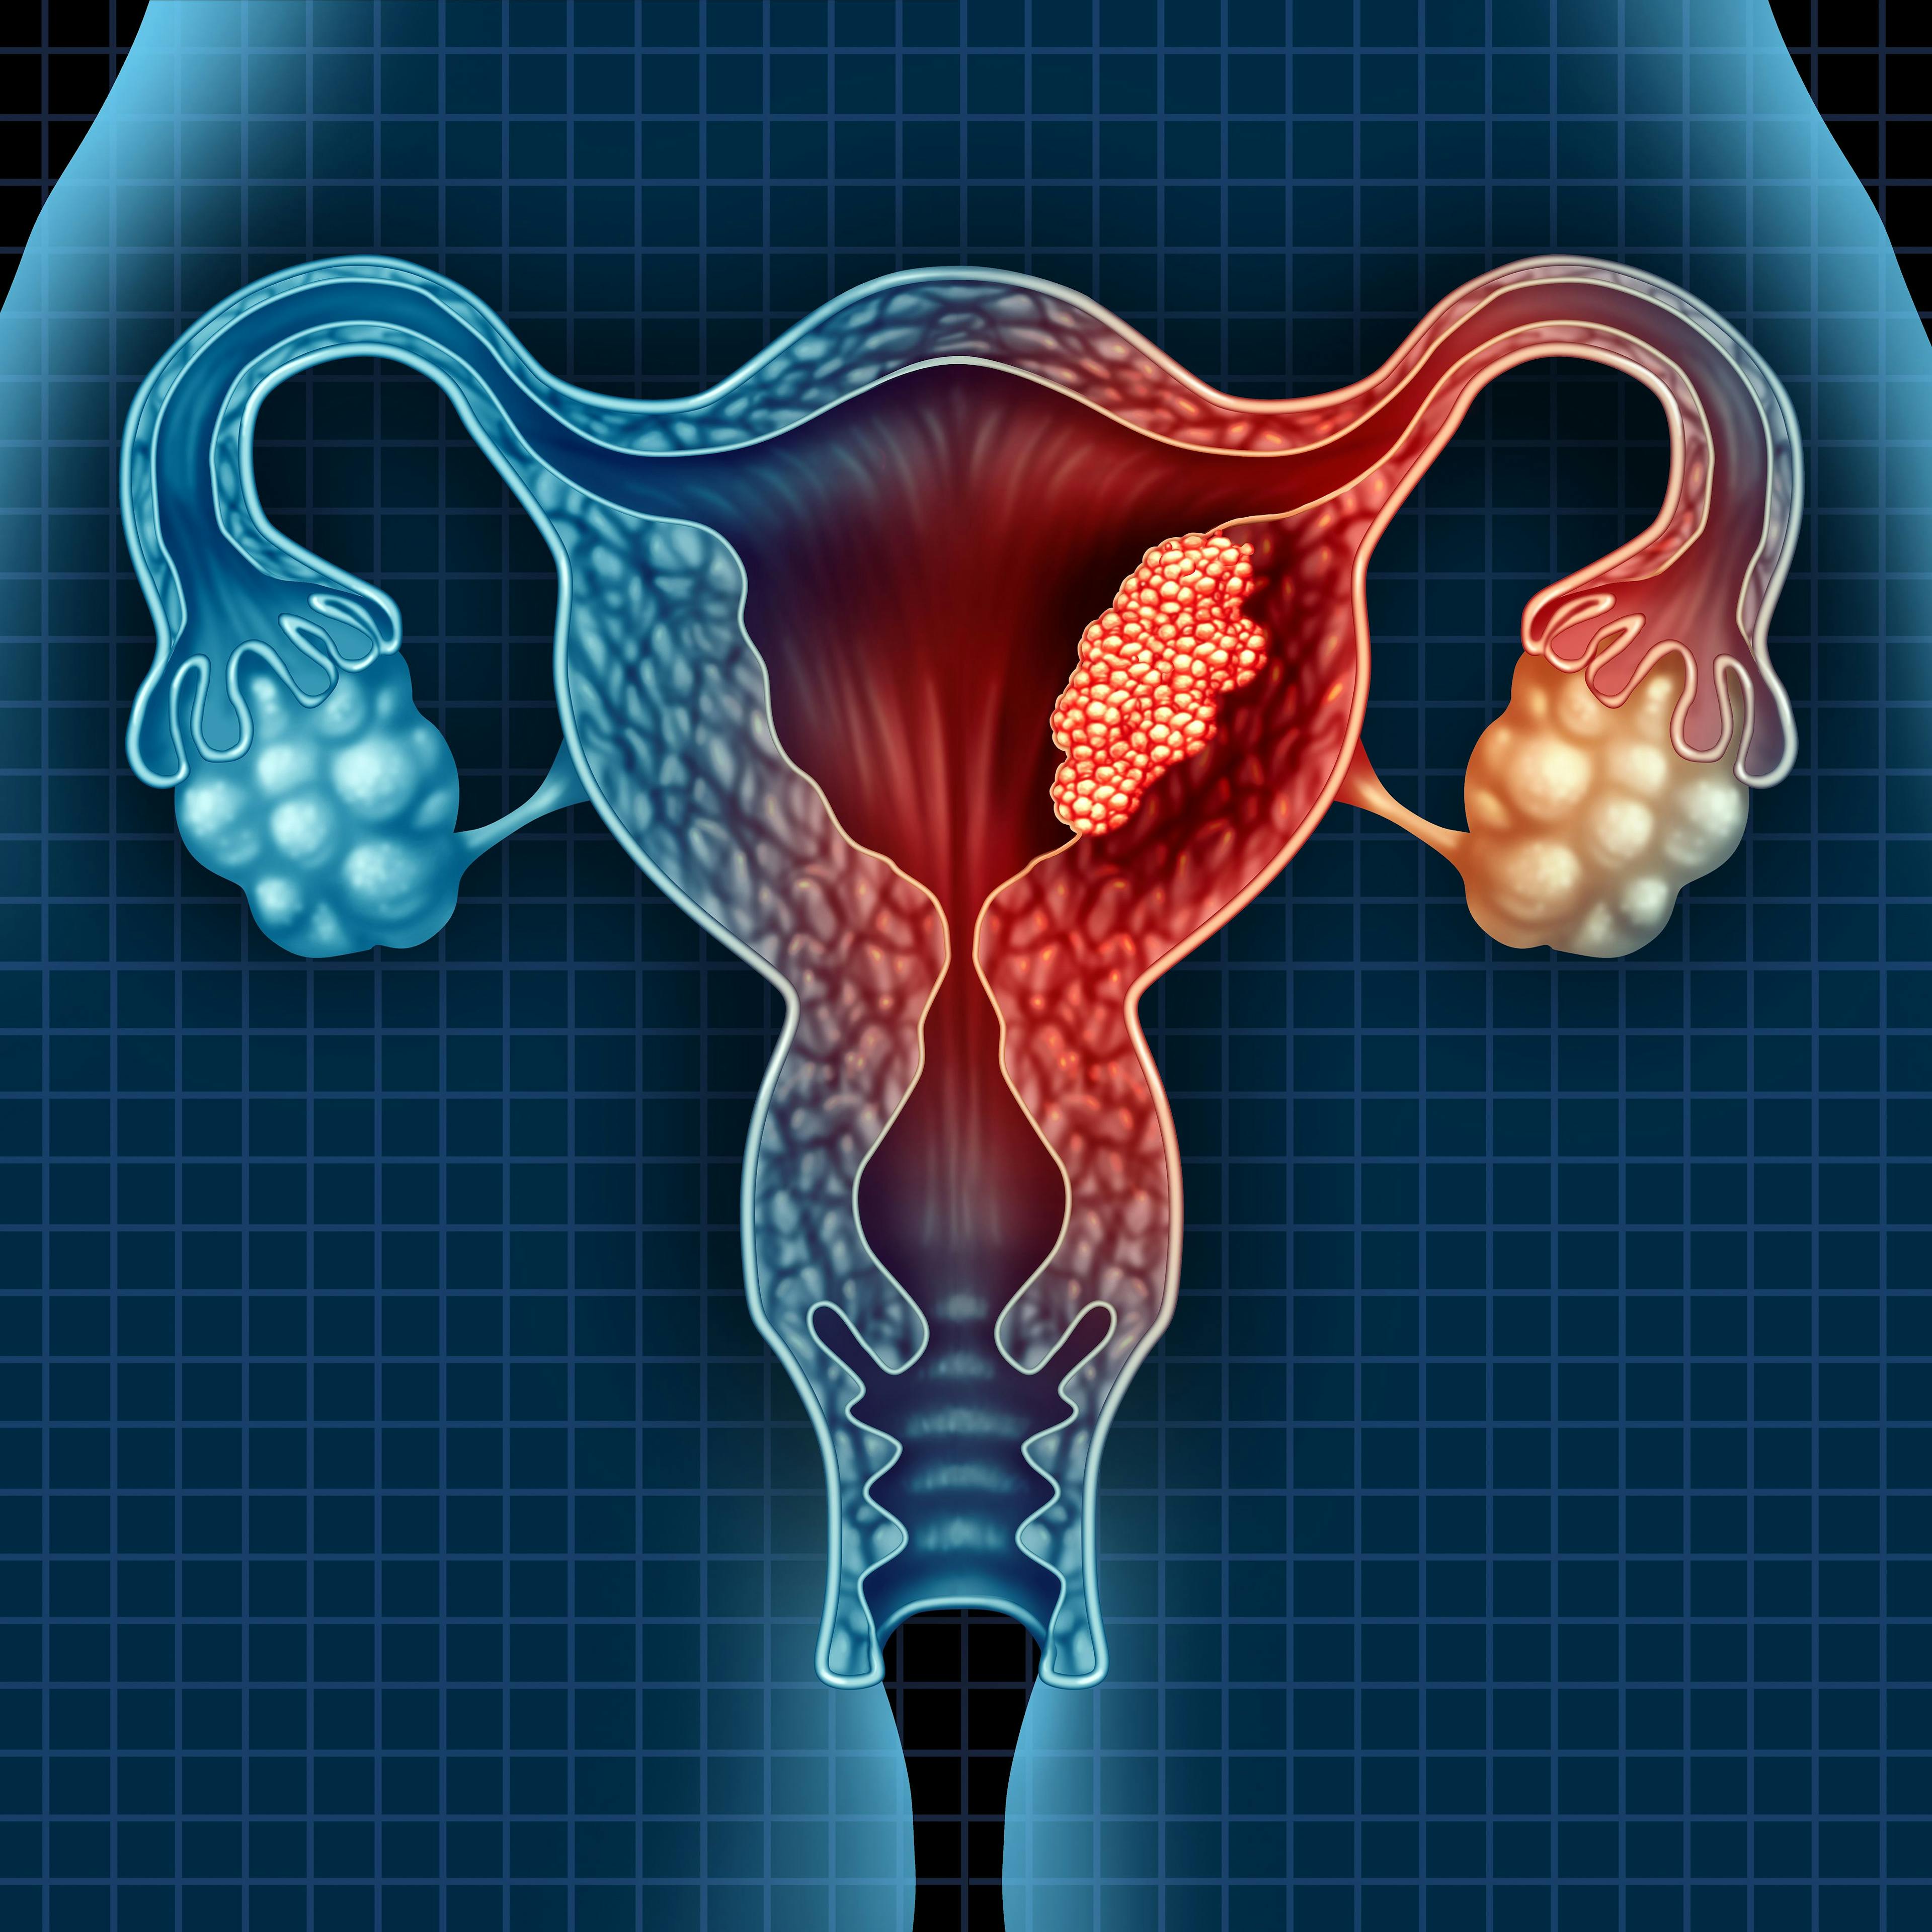 Retifanlimab shows promising antitumor activity in advanced endometrial cancer